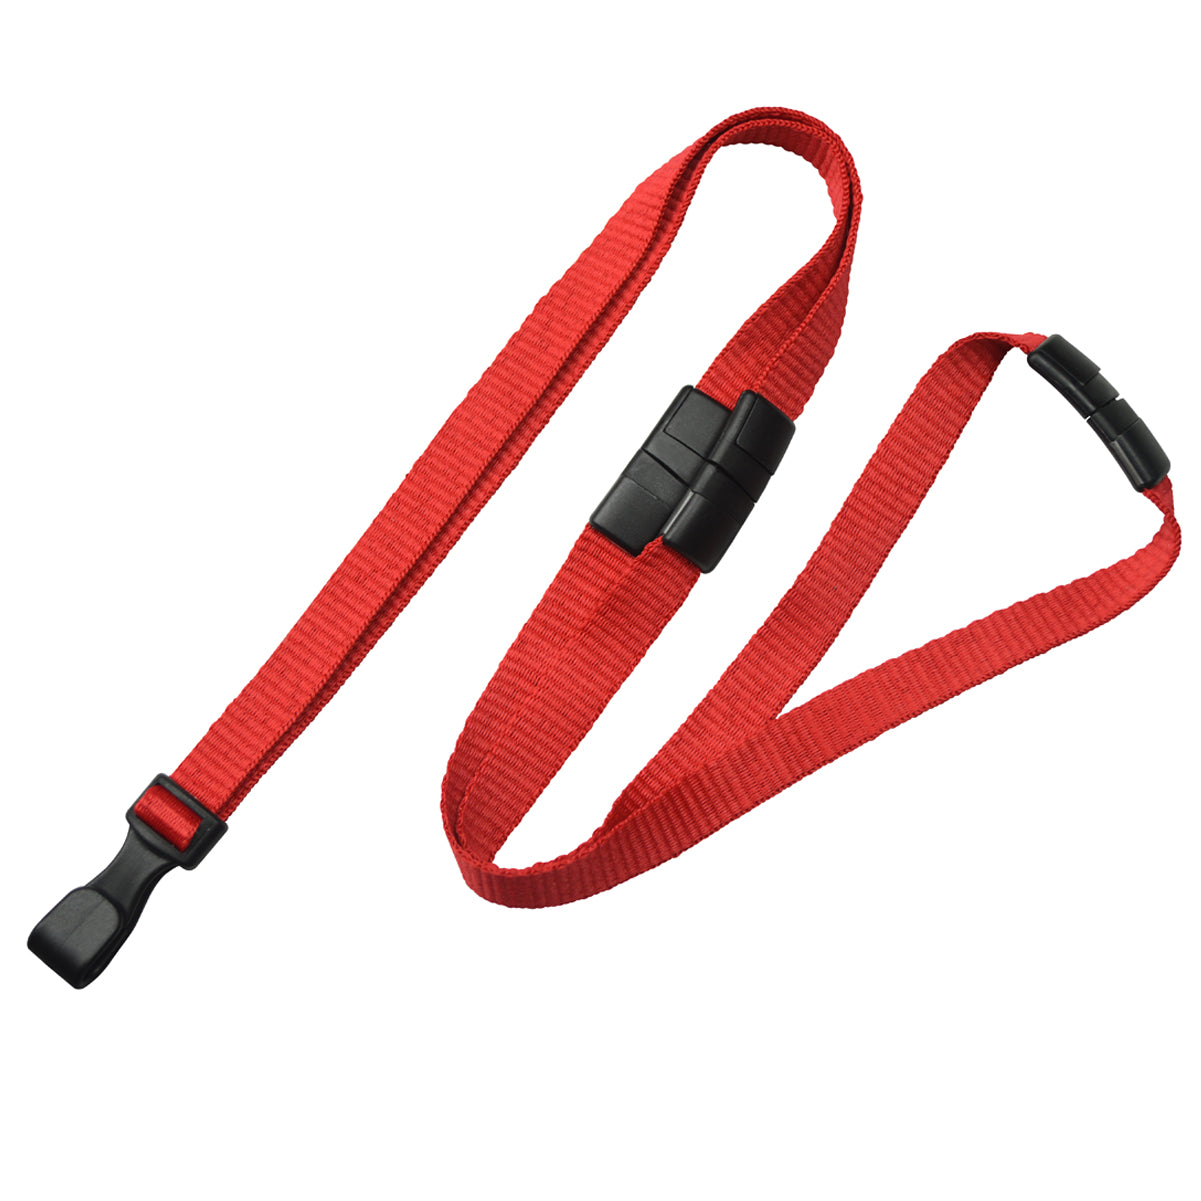 A Triple Breakaway Lanyard with THREE Safety Breakaway Points (2137-300X), with a black plastic buckle and an adjustable loop, perfect for snag-sensitive environments.